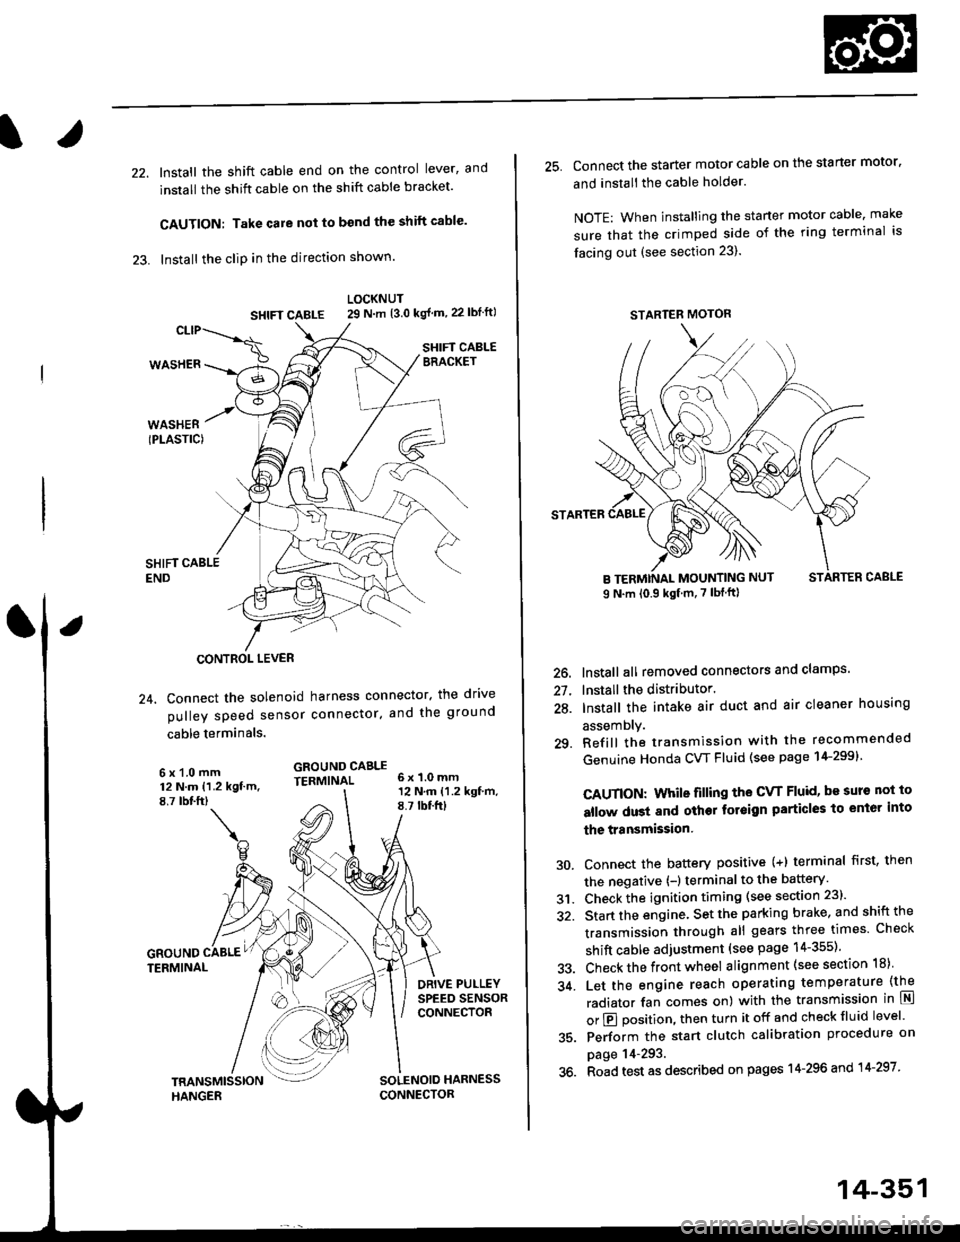 HONDA CIVIC 1997 6.G Owners Manual 22. Install the shift cable end on the control lever, and
install the shift cable on the shift cable bracket
CAUTION: Take care not to bend the shift cable
23. lnstall the clip in the direction show